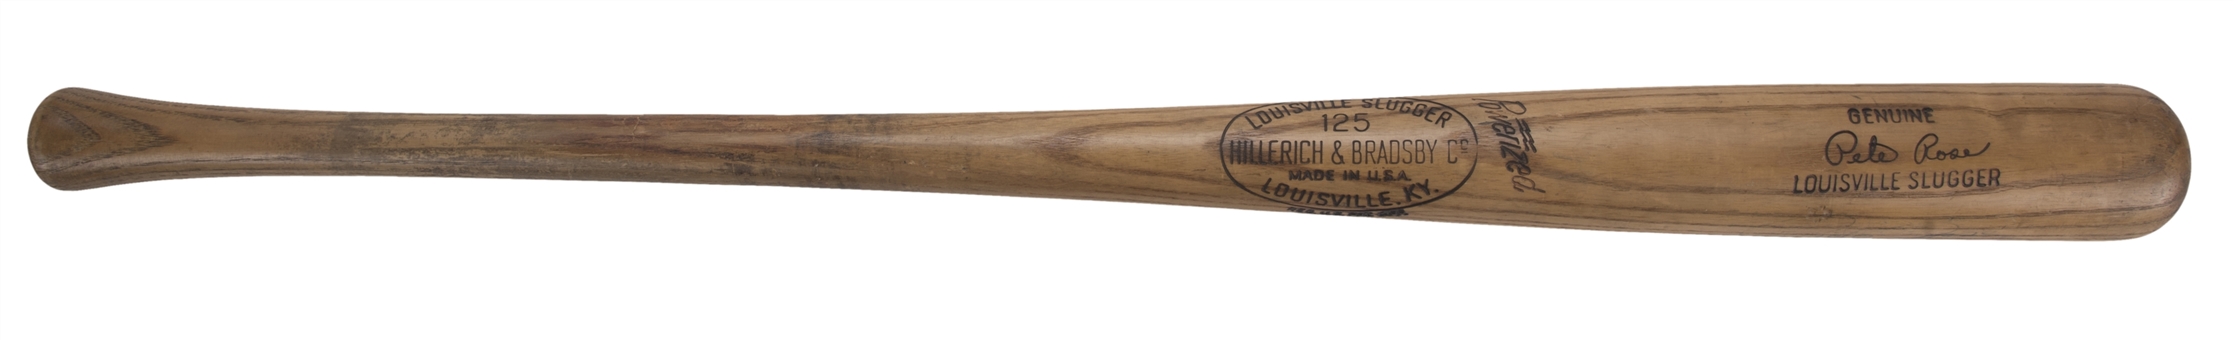 1963 Pete Rose Rookie Year Game Used Hillerich & Bradsby U1 Model Bat From The Charlie Sheen Collection (PSA/DNA GU 8)